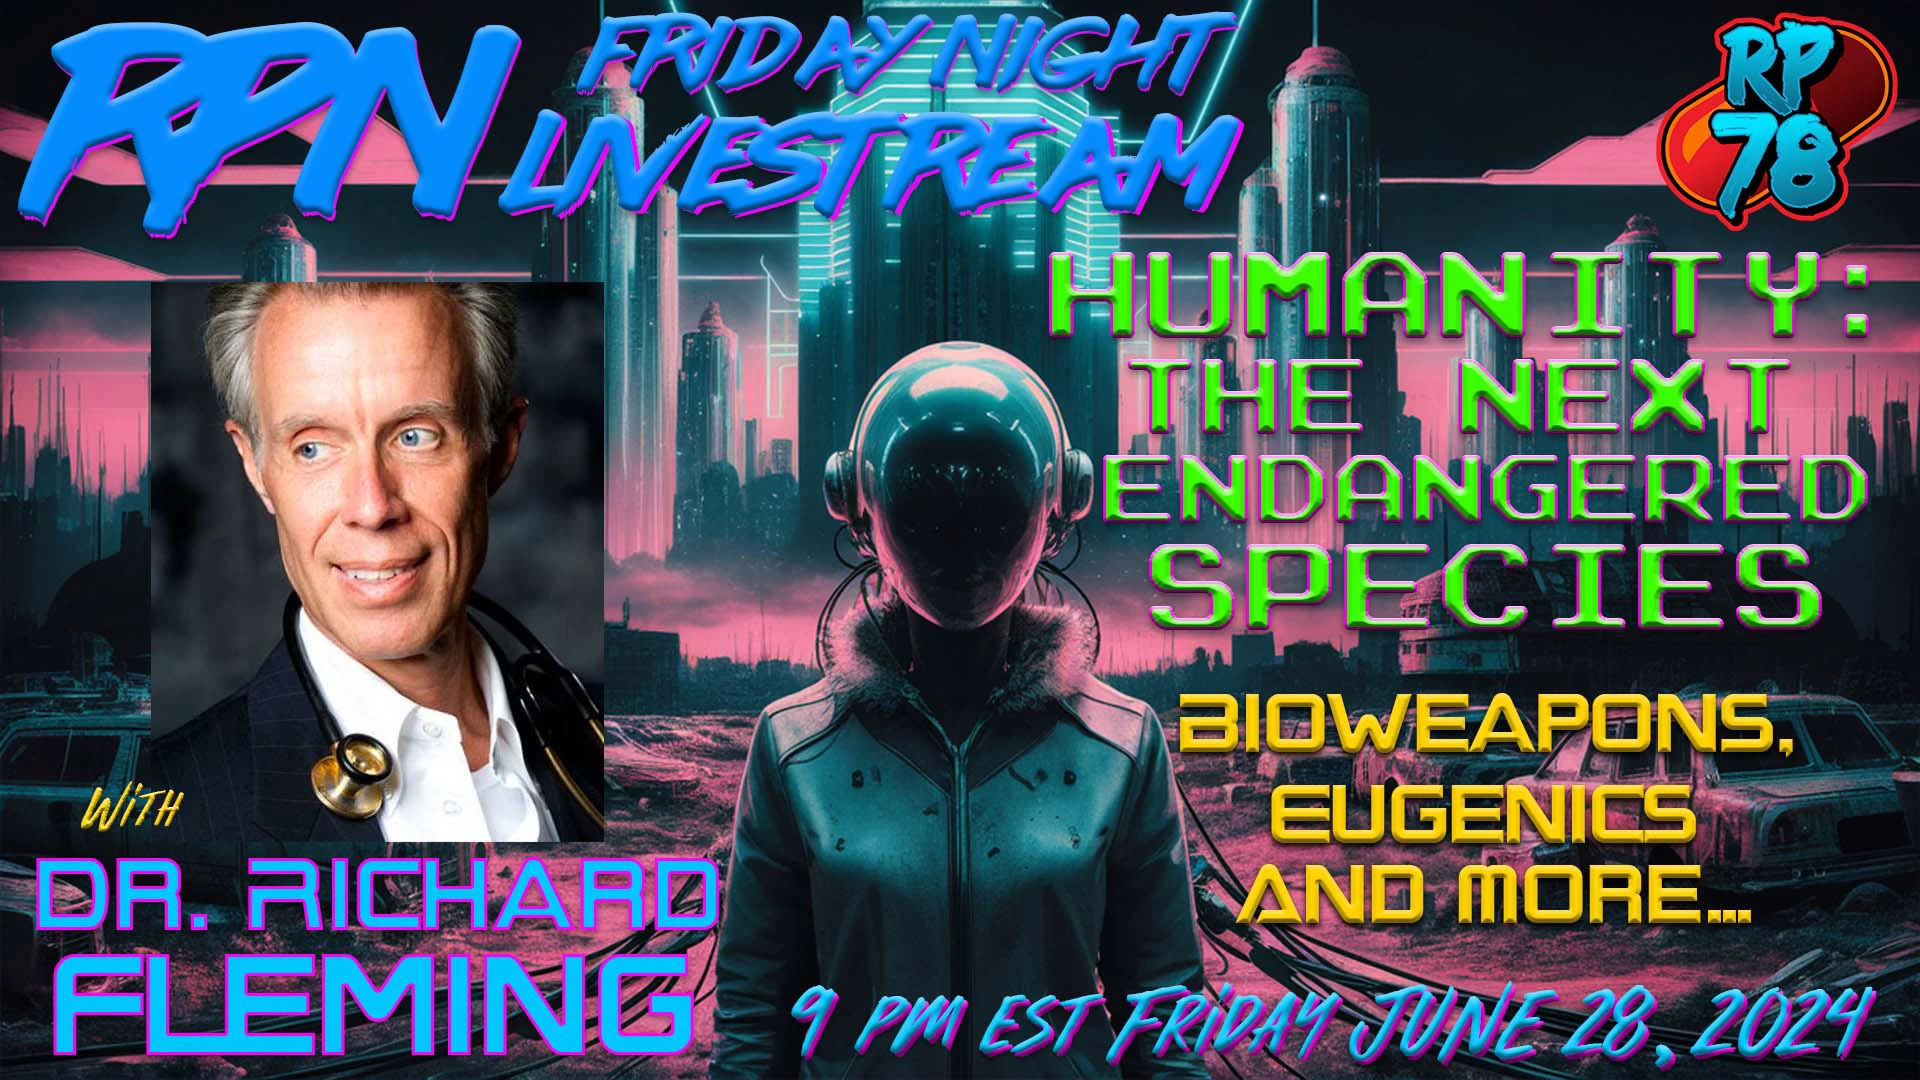 Humanity: The Next Endangered Species with Dr. Richard Fleming on Sat Night Livestream